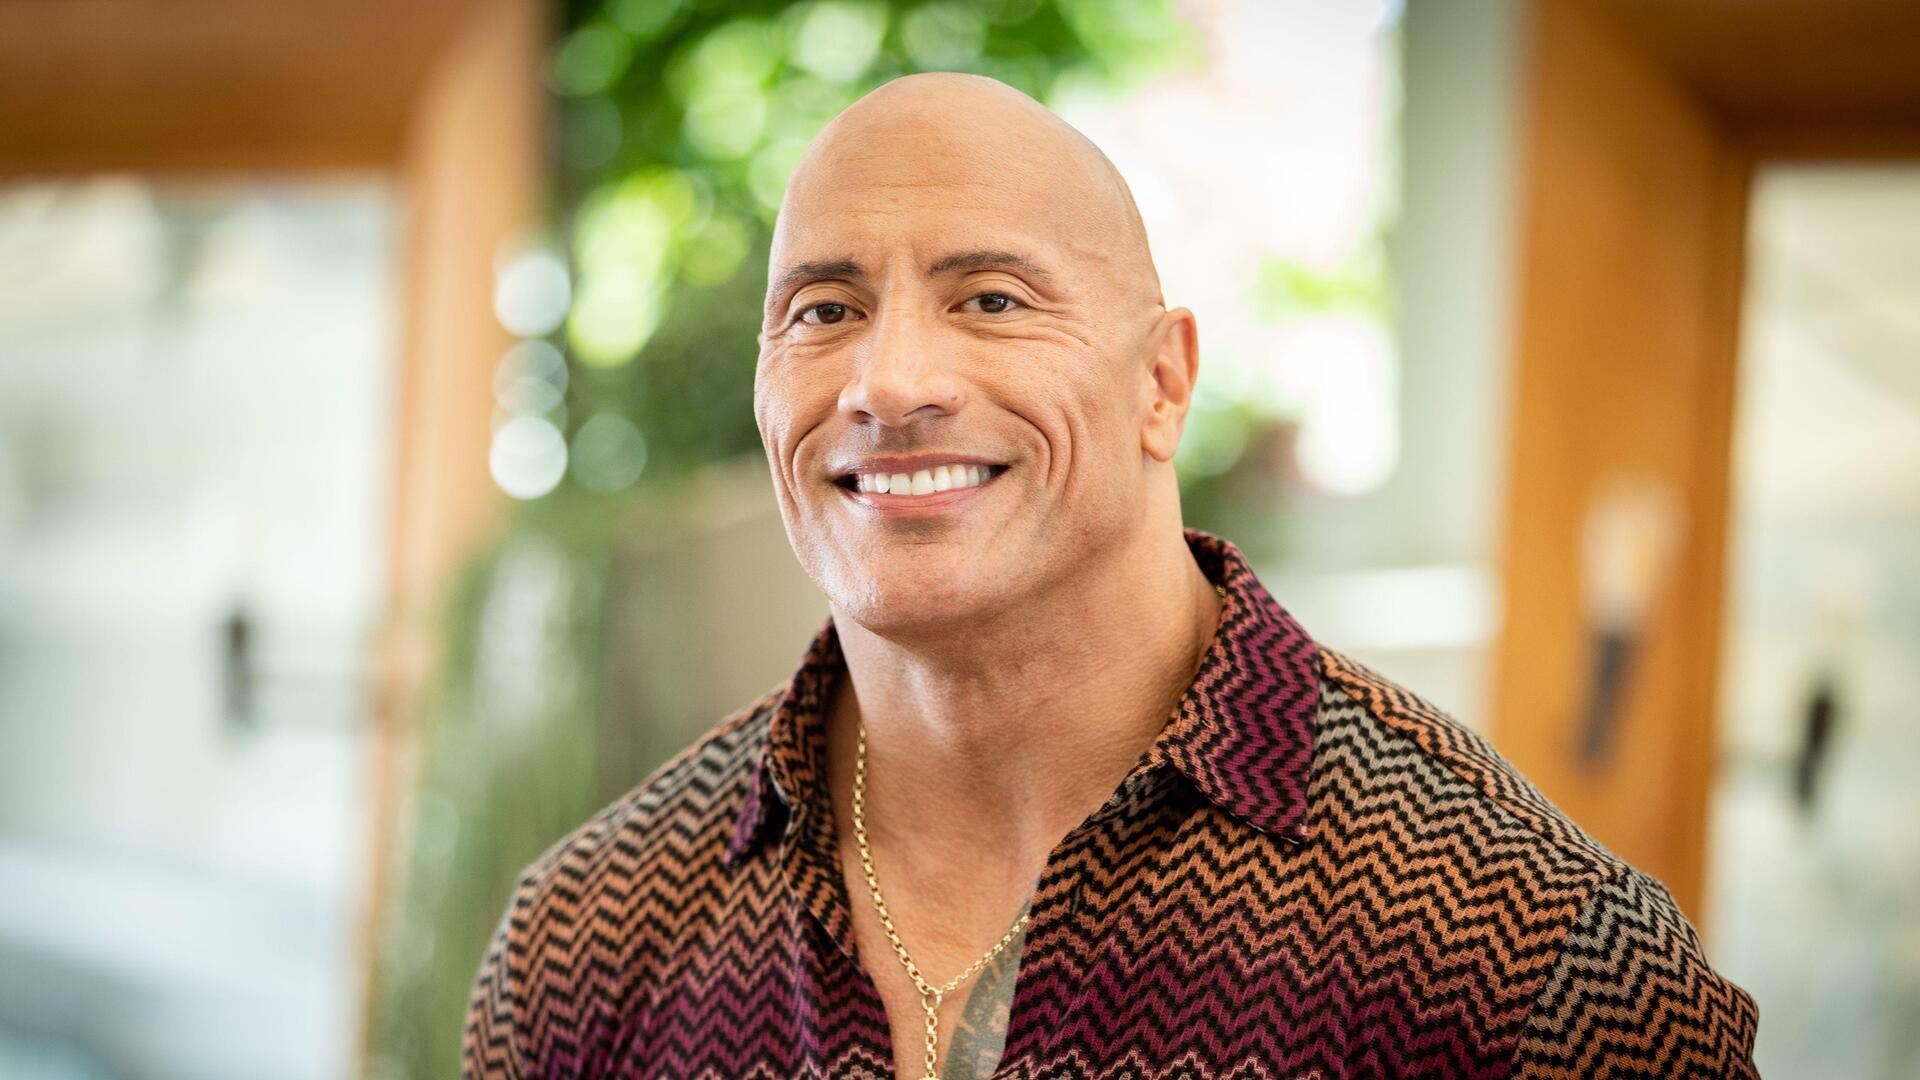 'Toxic, false clickbait garbage': Dwayne Johnson responds to booing allegations